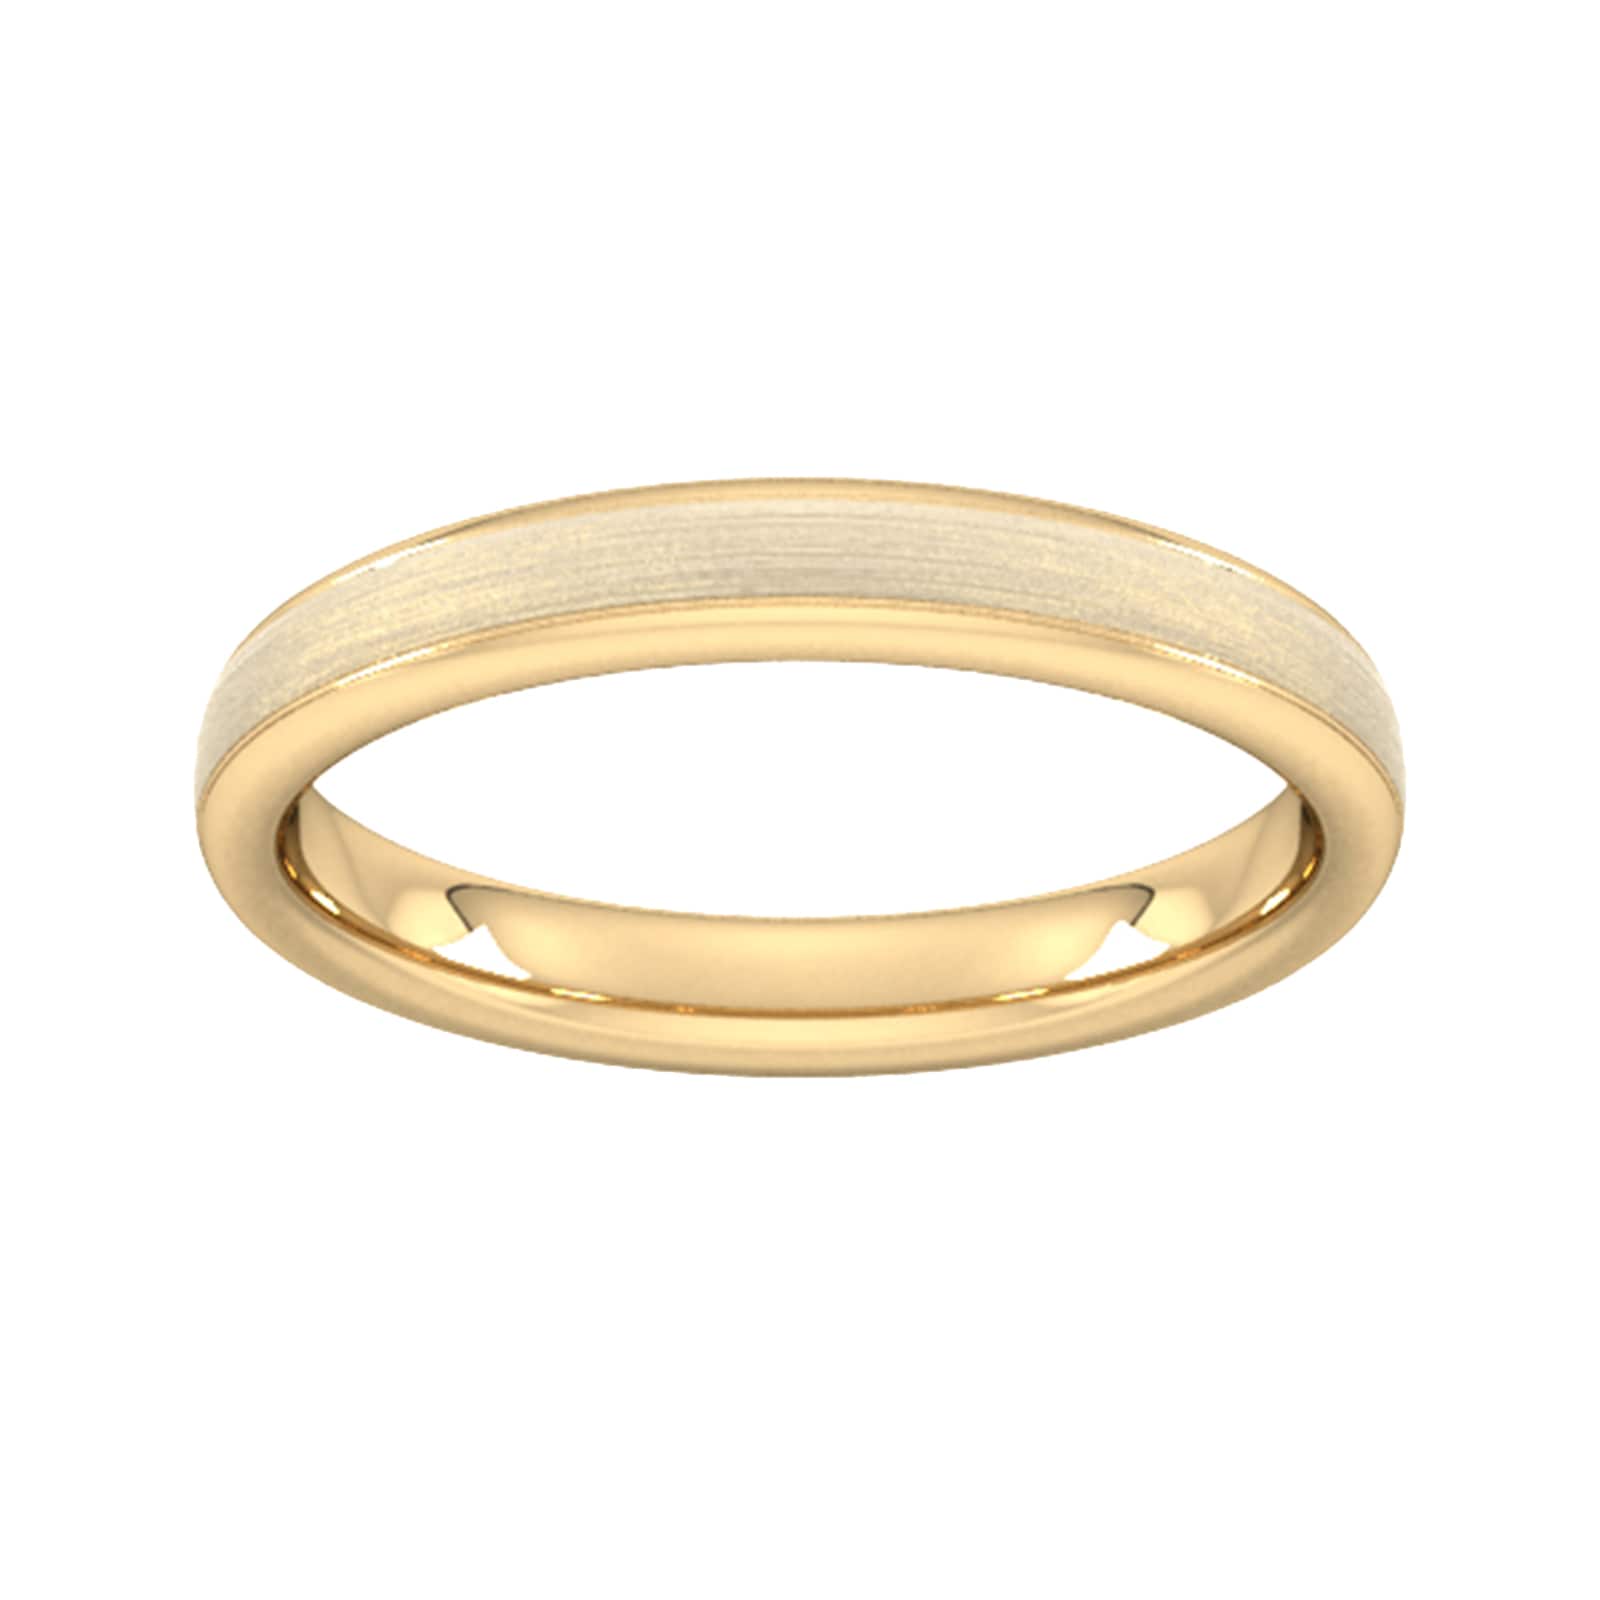 3mm Slight Court Standard Matt Centre With Grooves Wedding Ring In 18 Carat Yellow Gold - Ring Size X